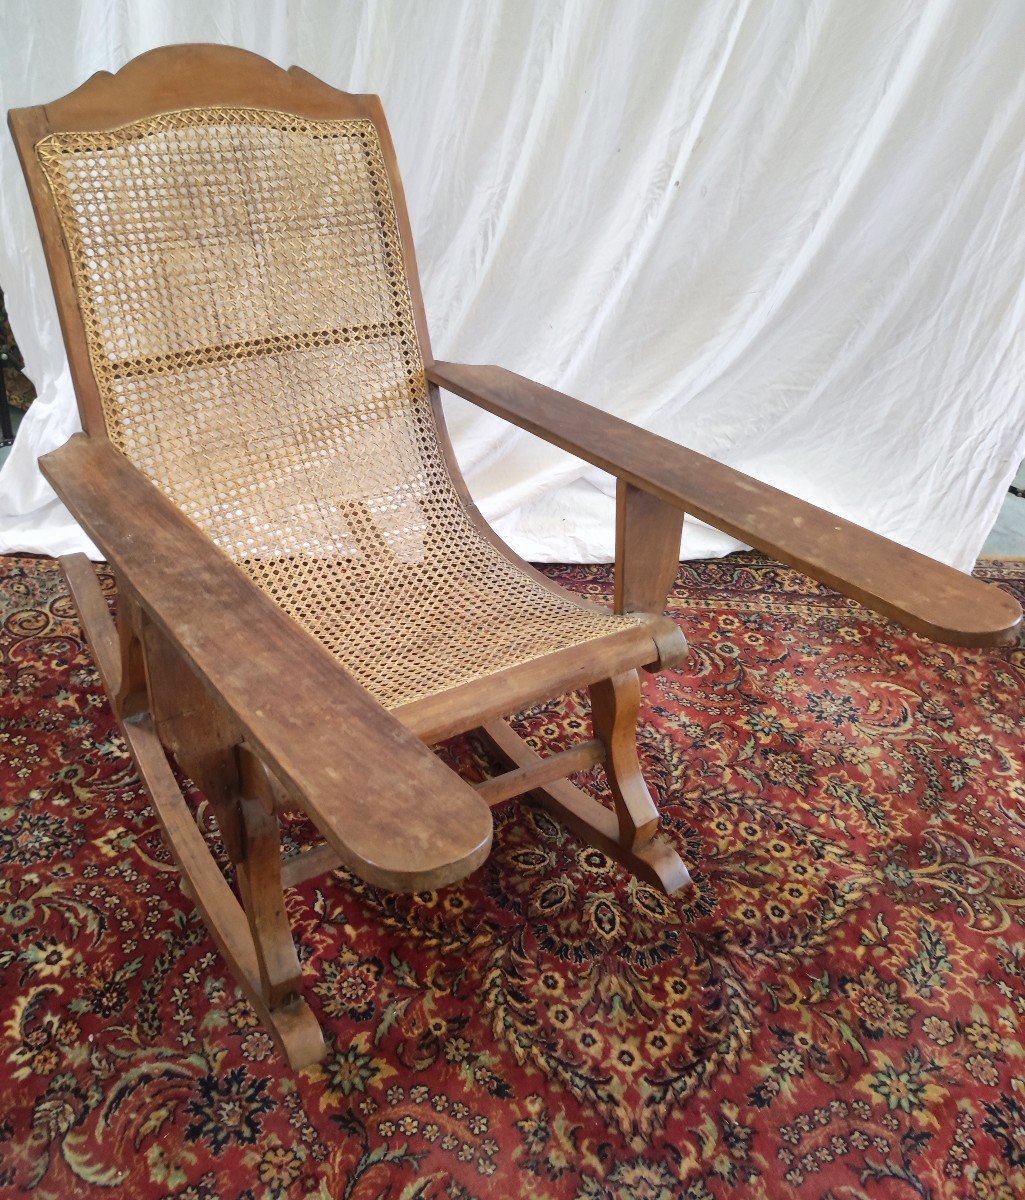 Rocking Chair Said From Planters Late Nineteenth-photo-5